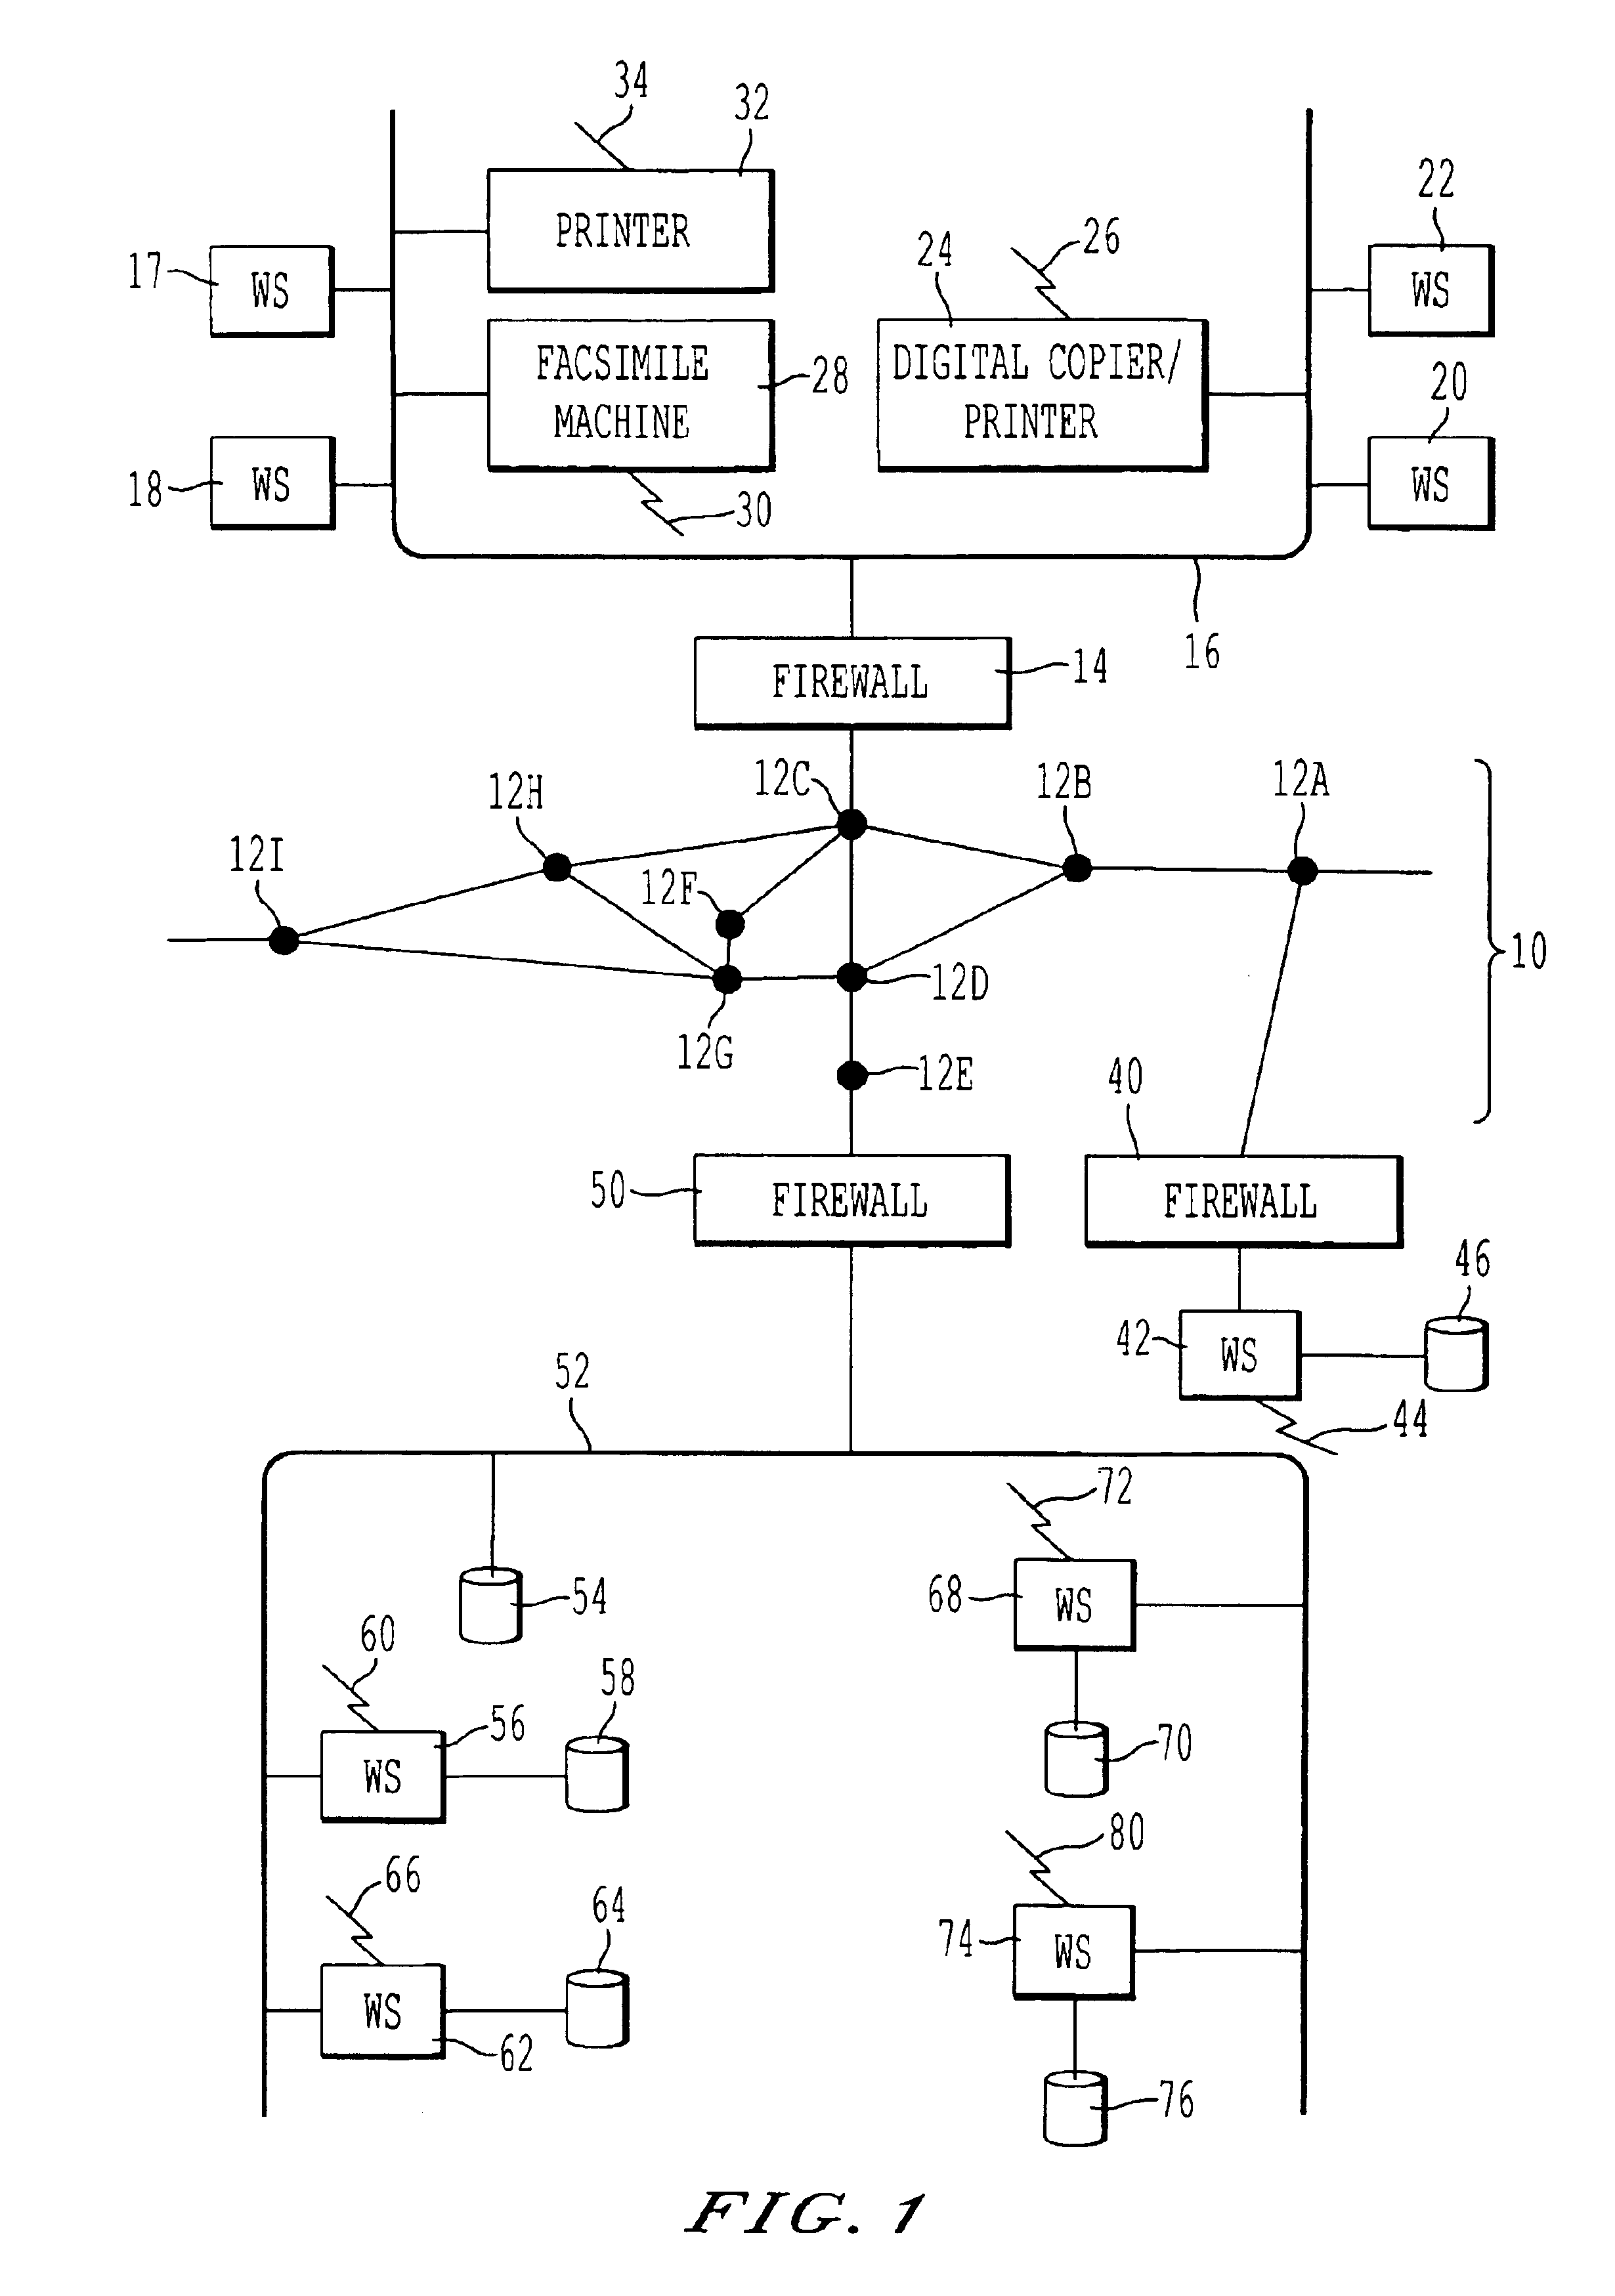 Method and system for maintaining the business office appliance through log files